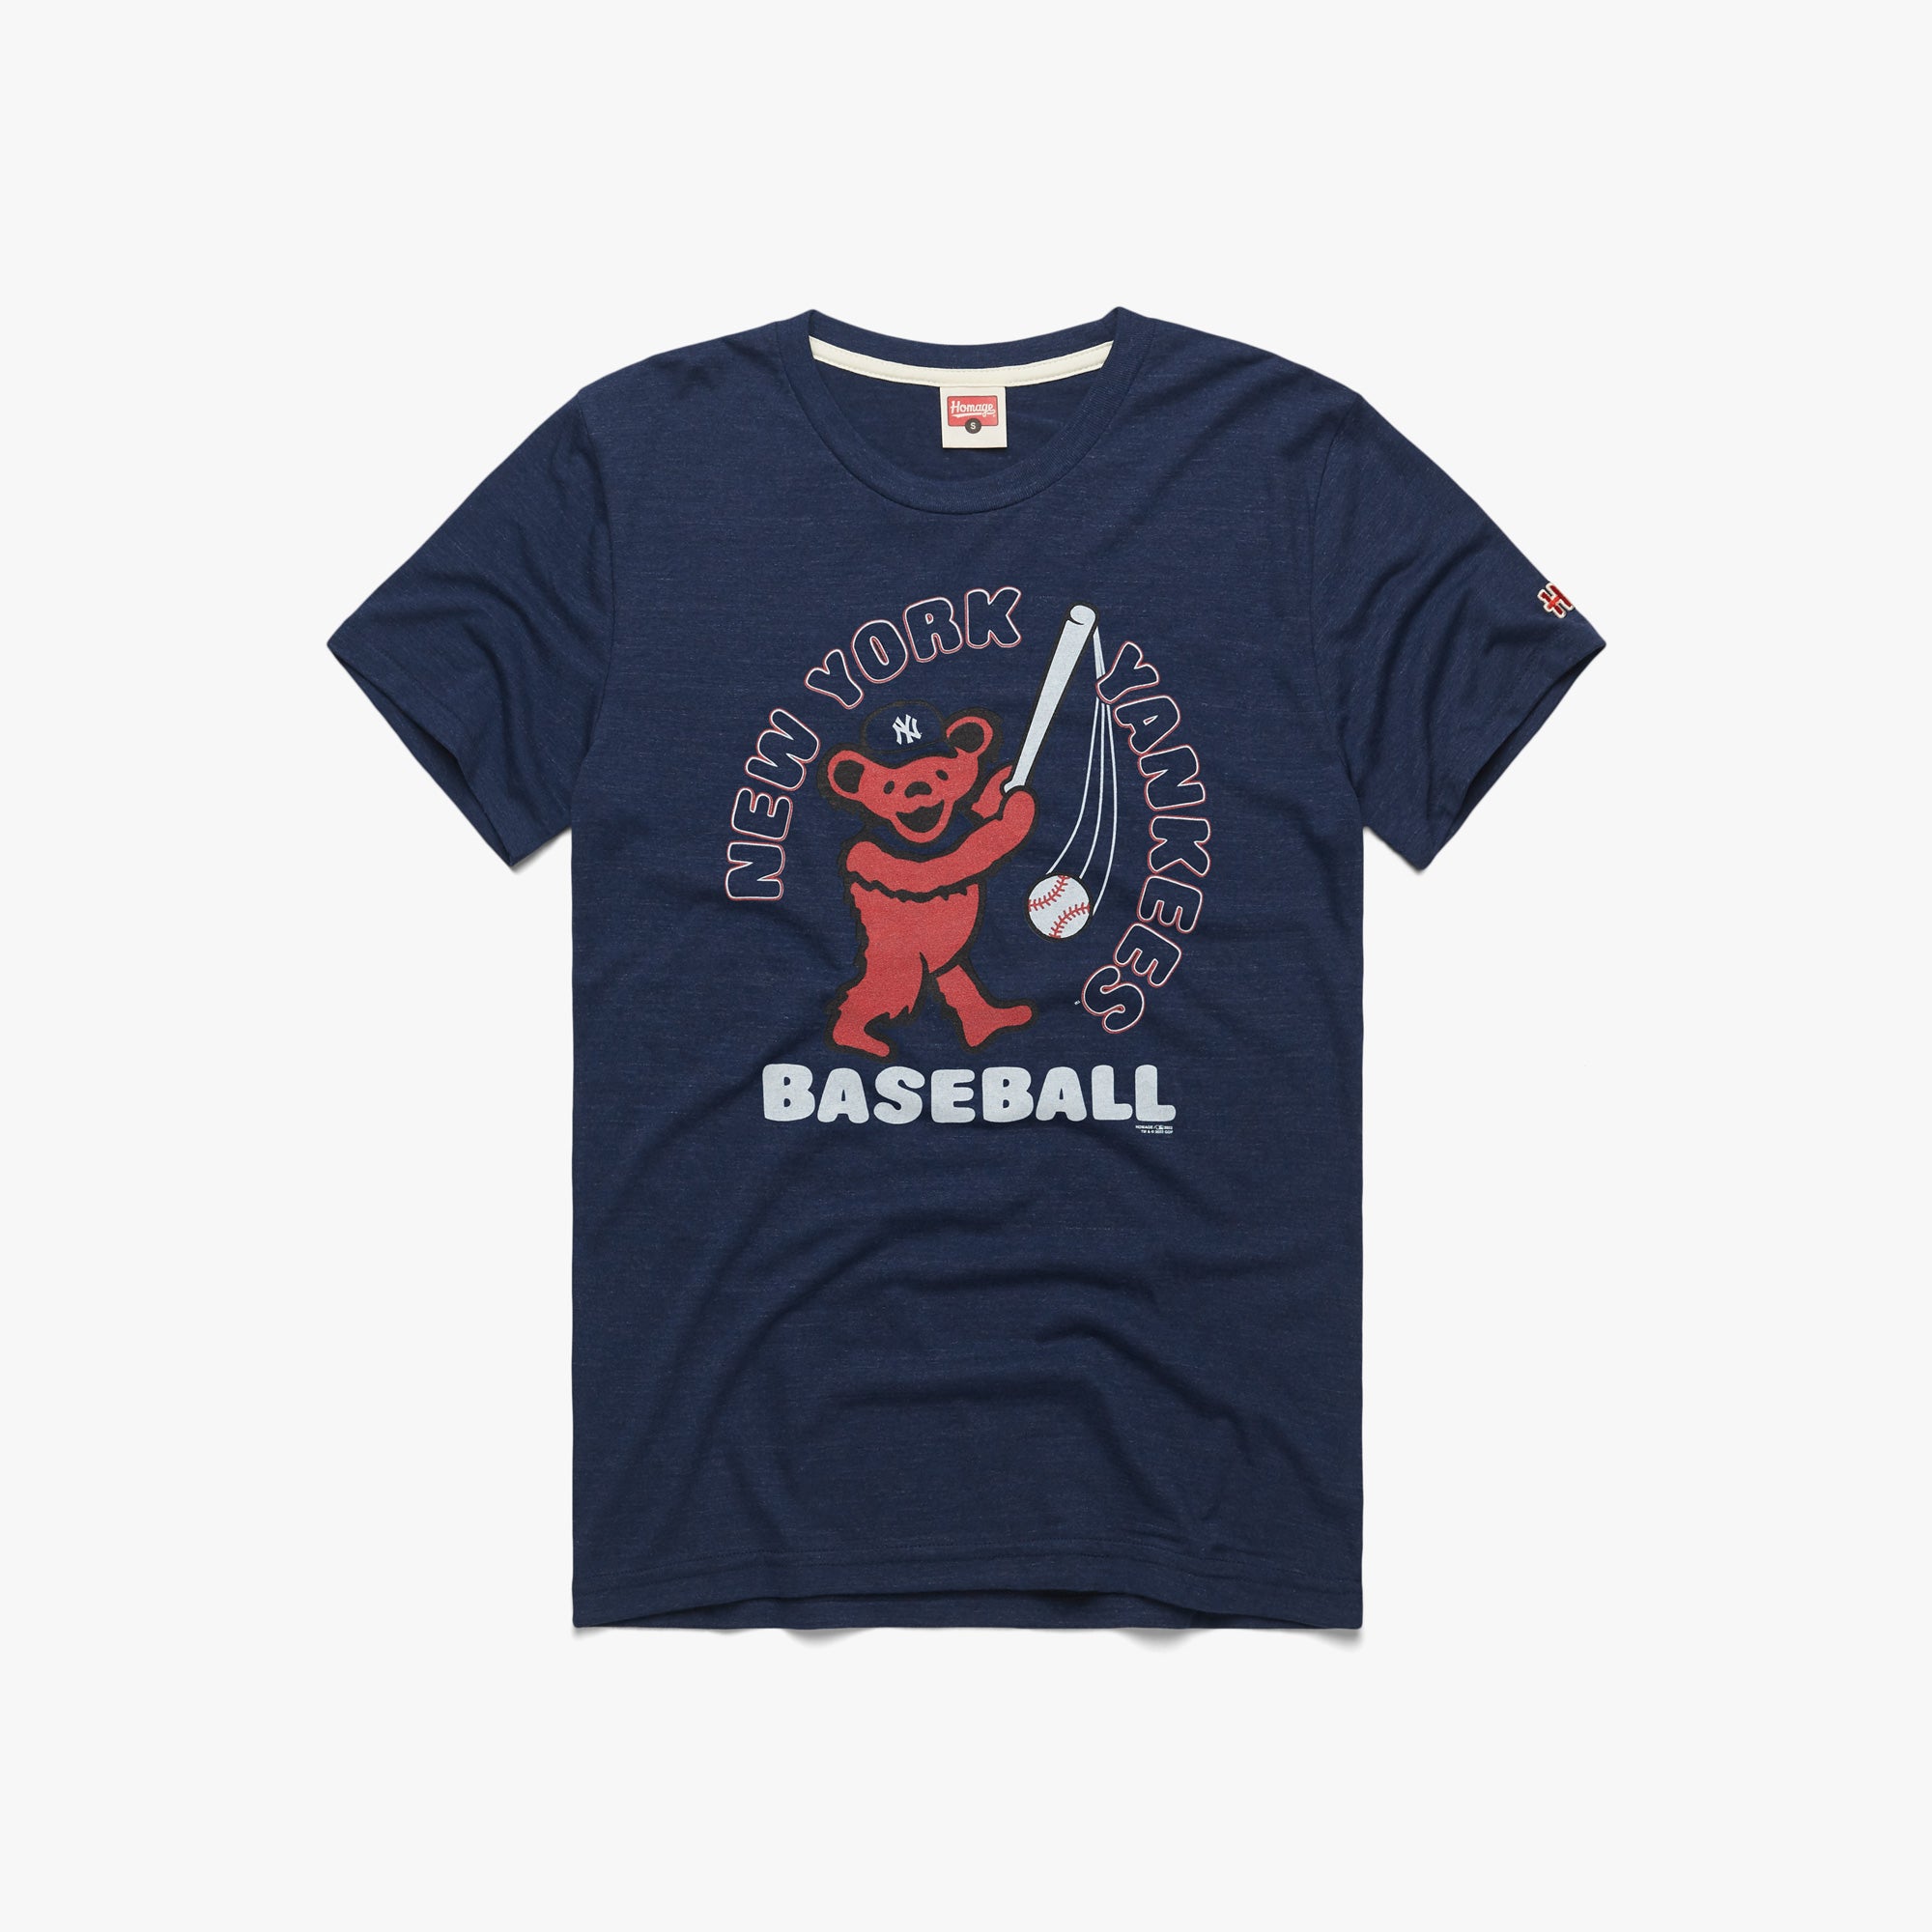 MLB x Grateful Dead x Yankees T-Shirt from Homage. | Navy | Vintage Apparel from Homage.